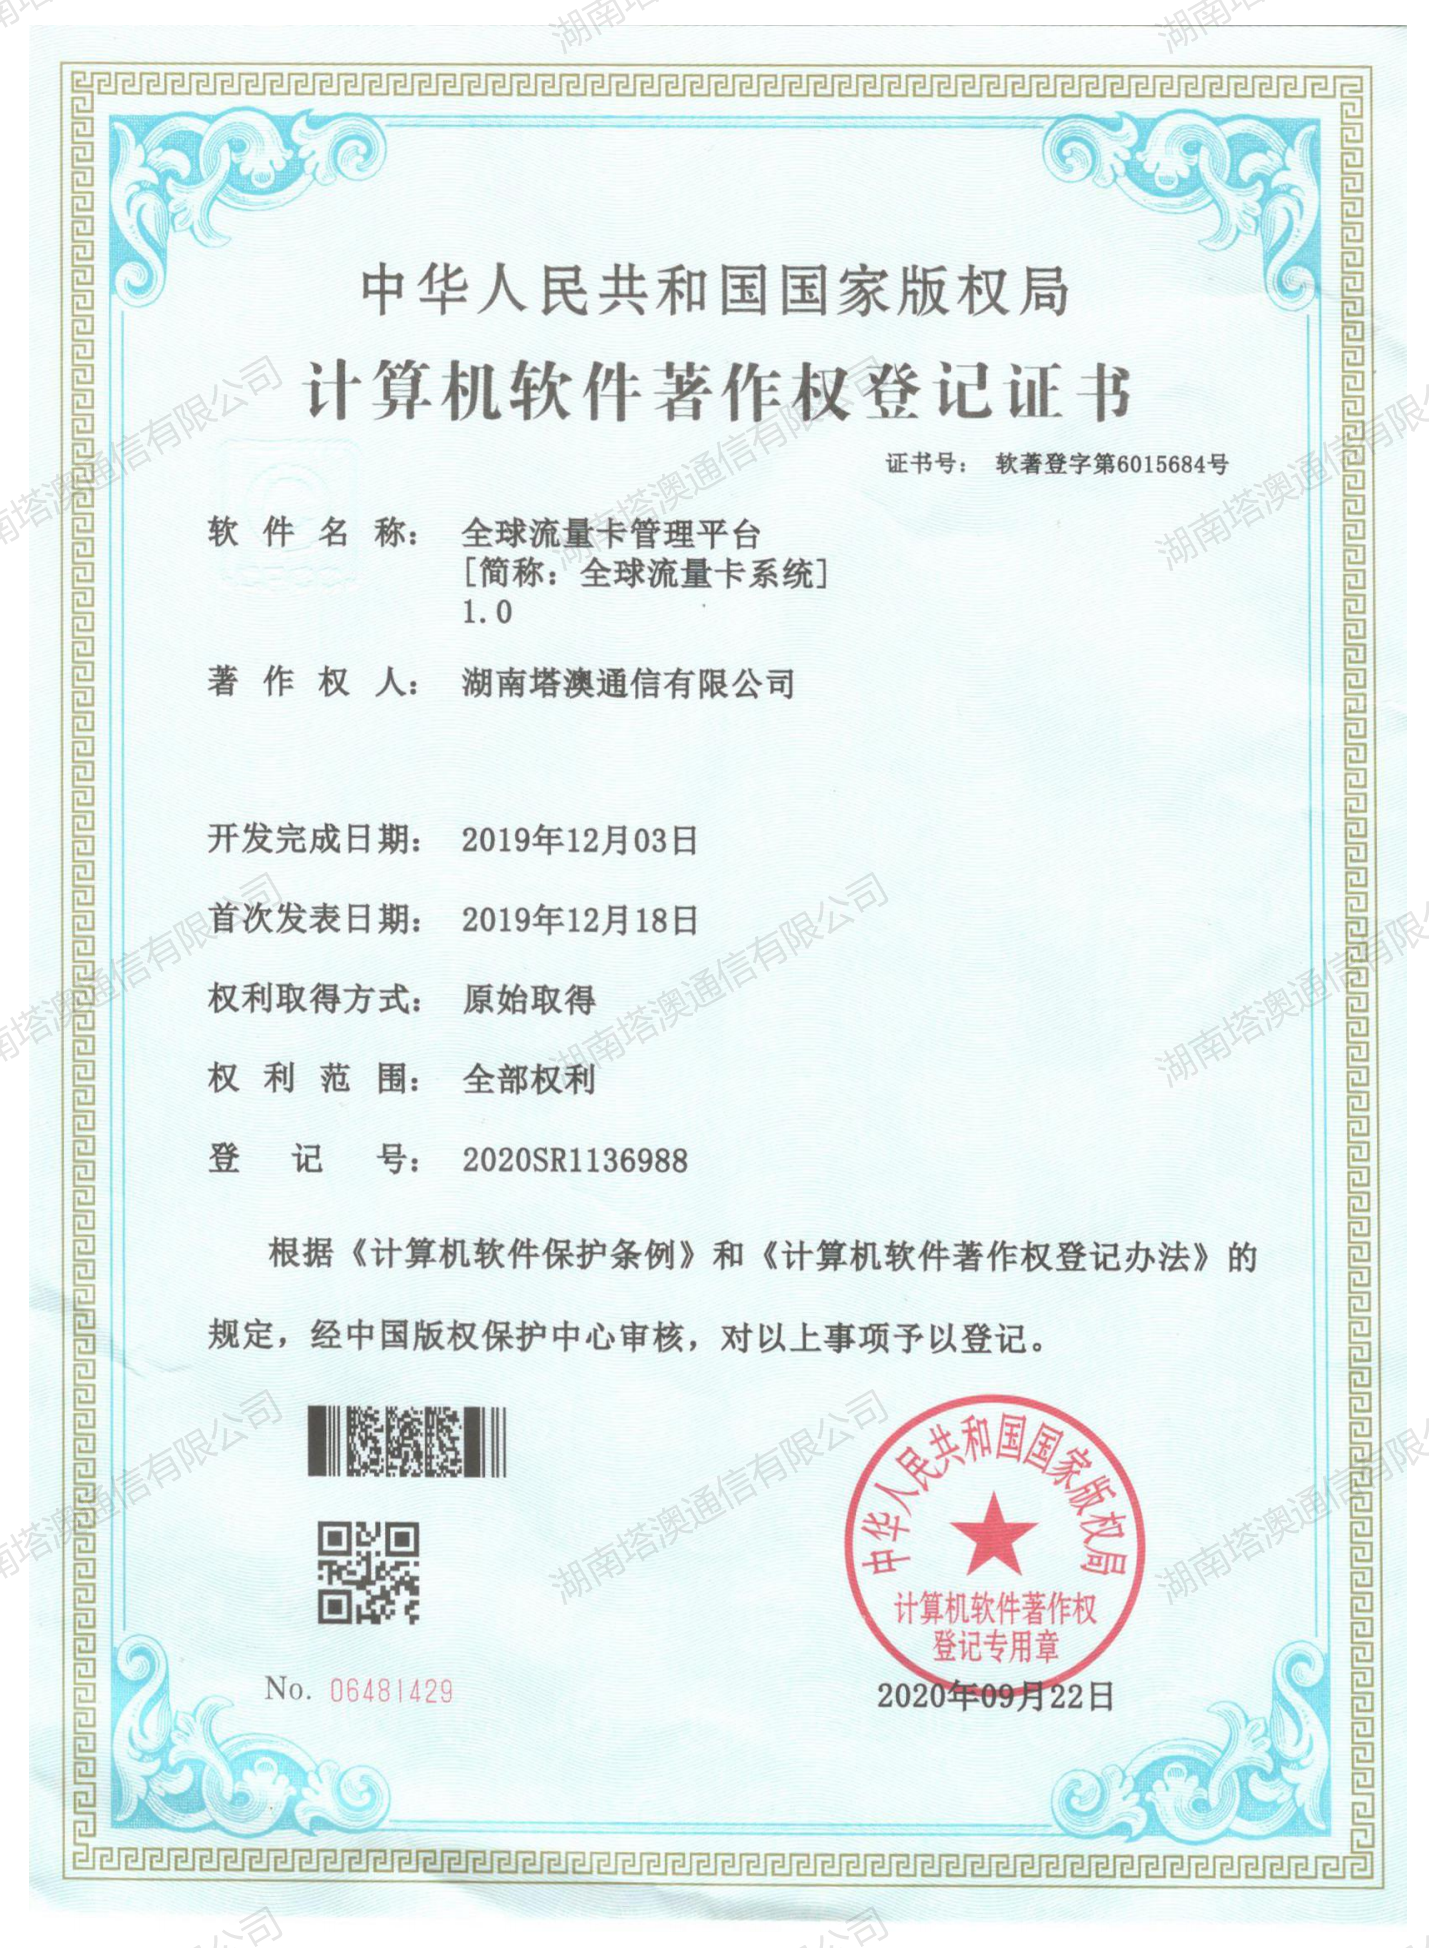 Global flow card system software copyright certificate